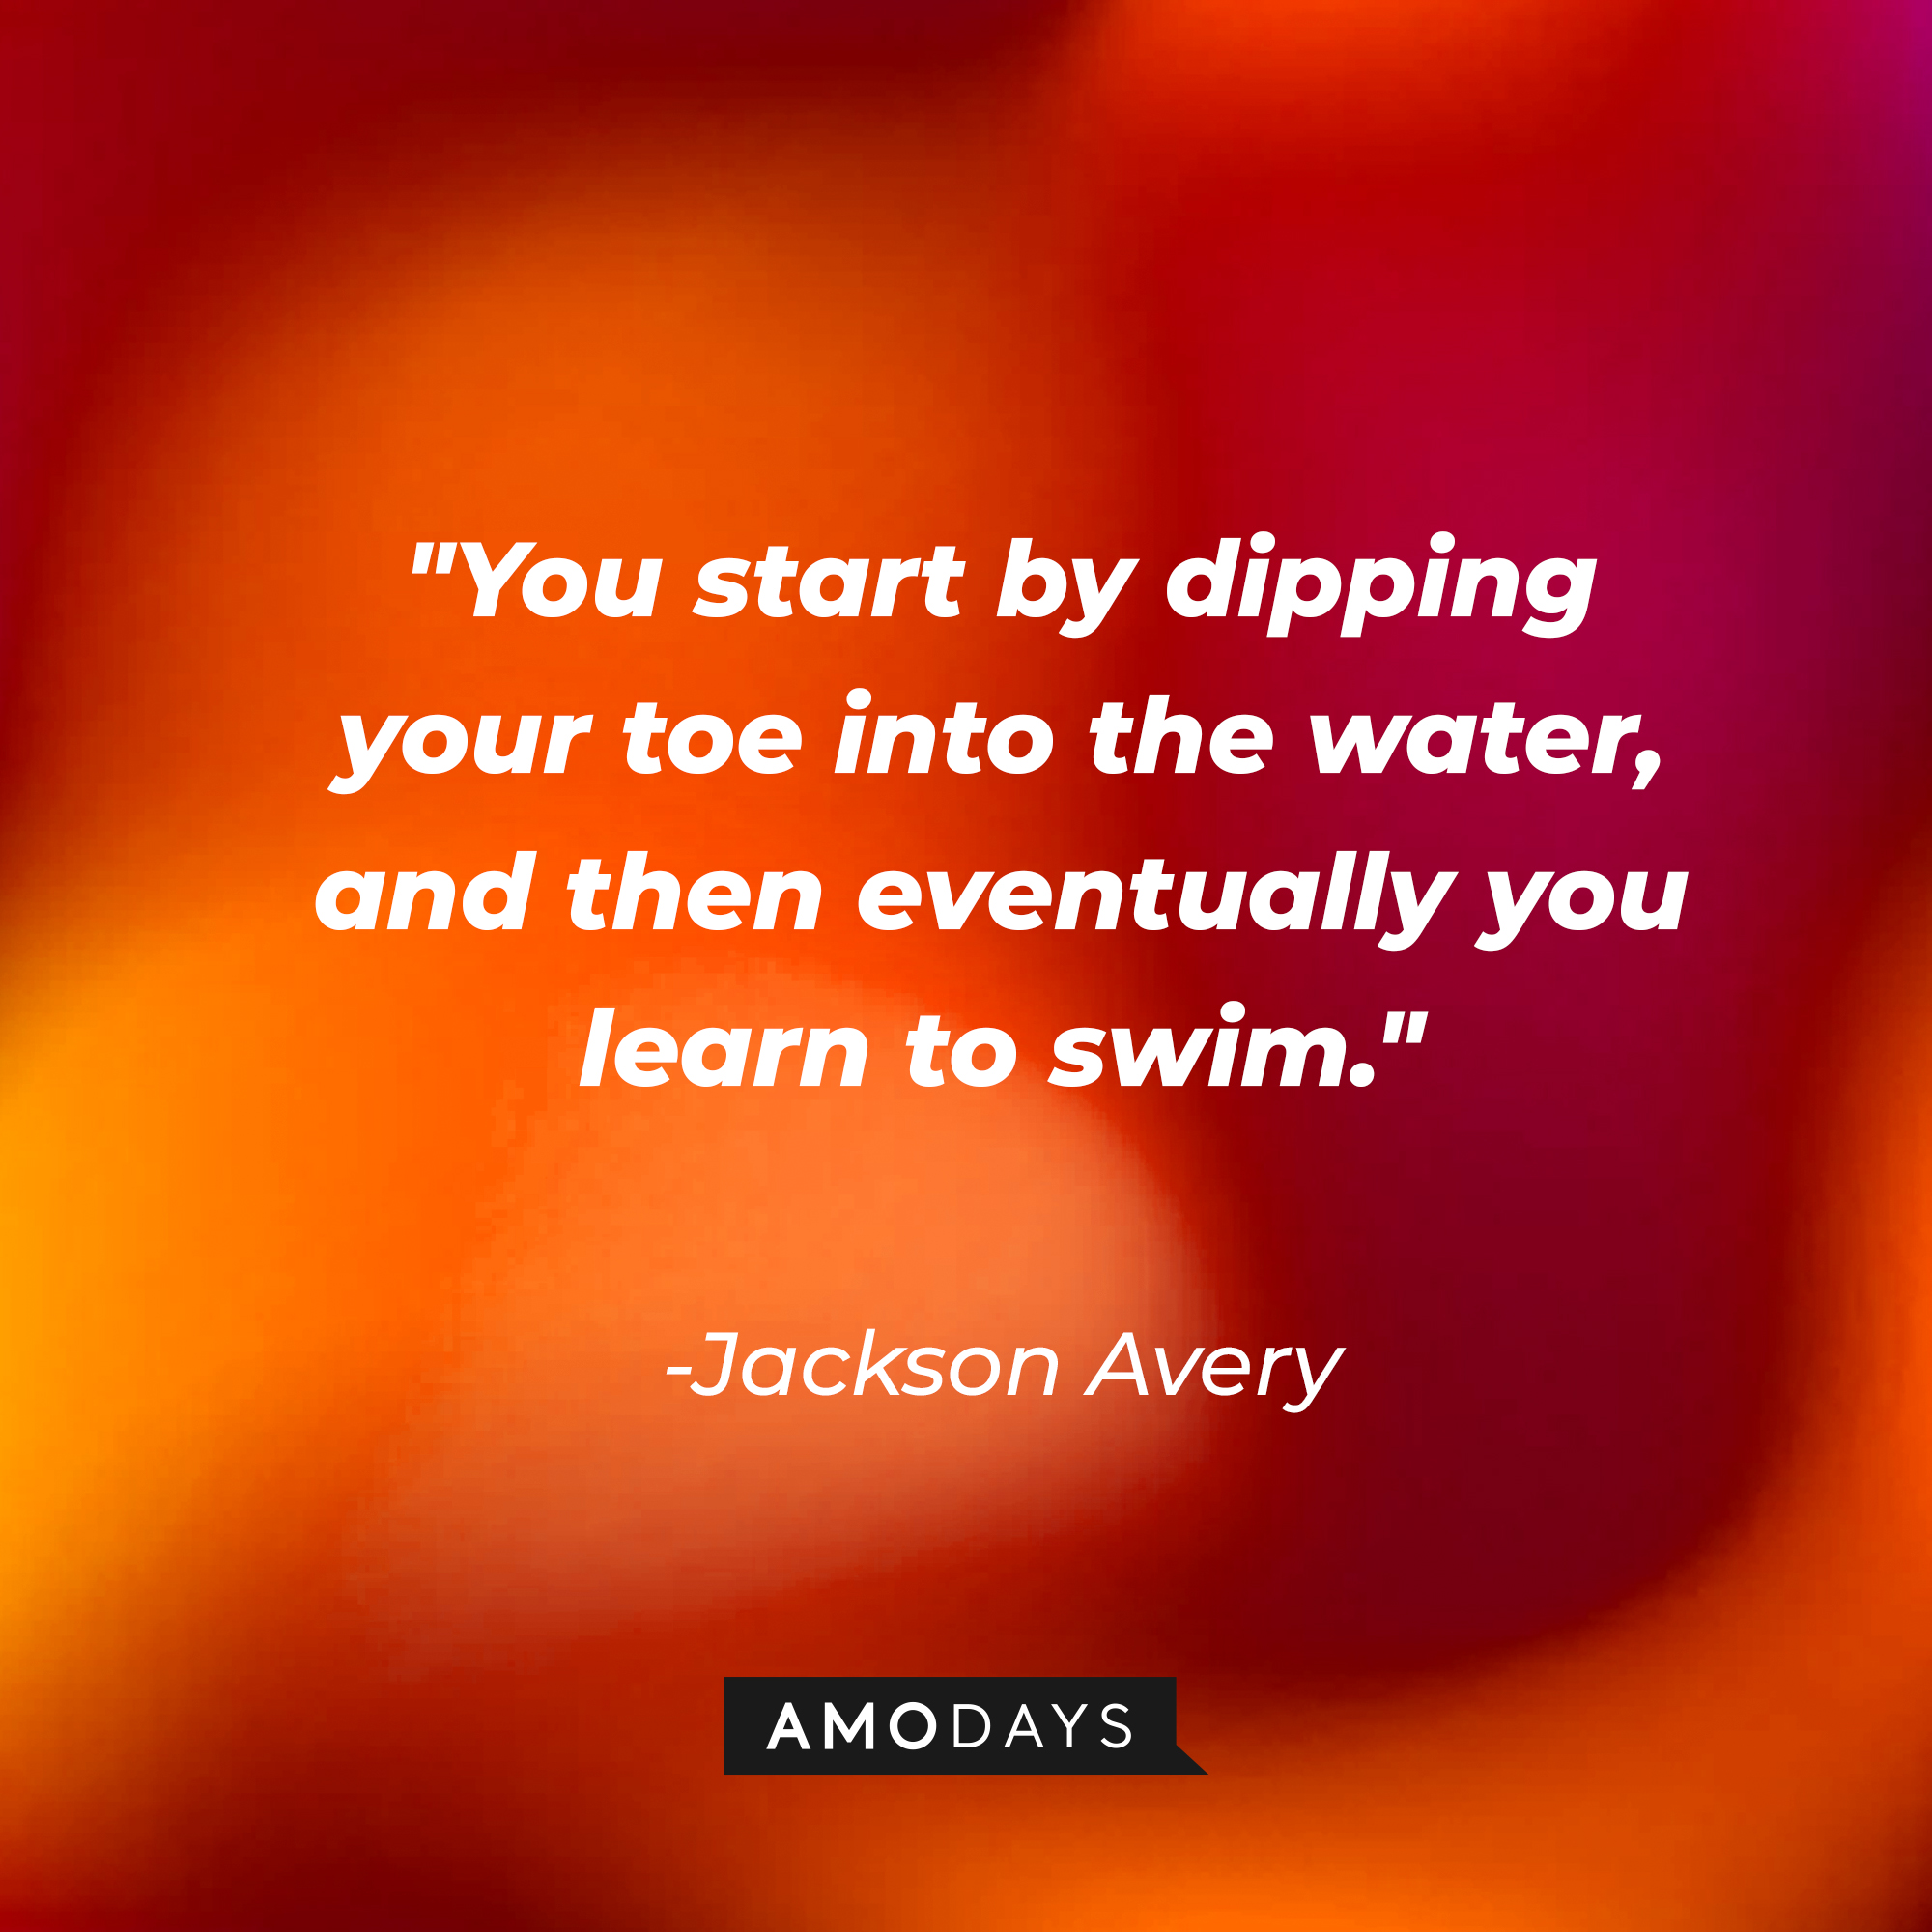 Jackson Avery’s quote: “You start by dipping your toe into the water, and then eventually you learn to swim.” |Source: AmoDays